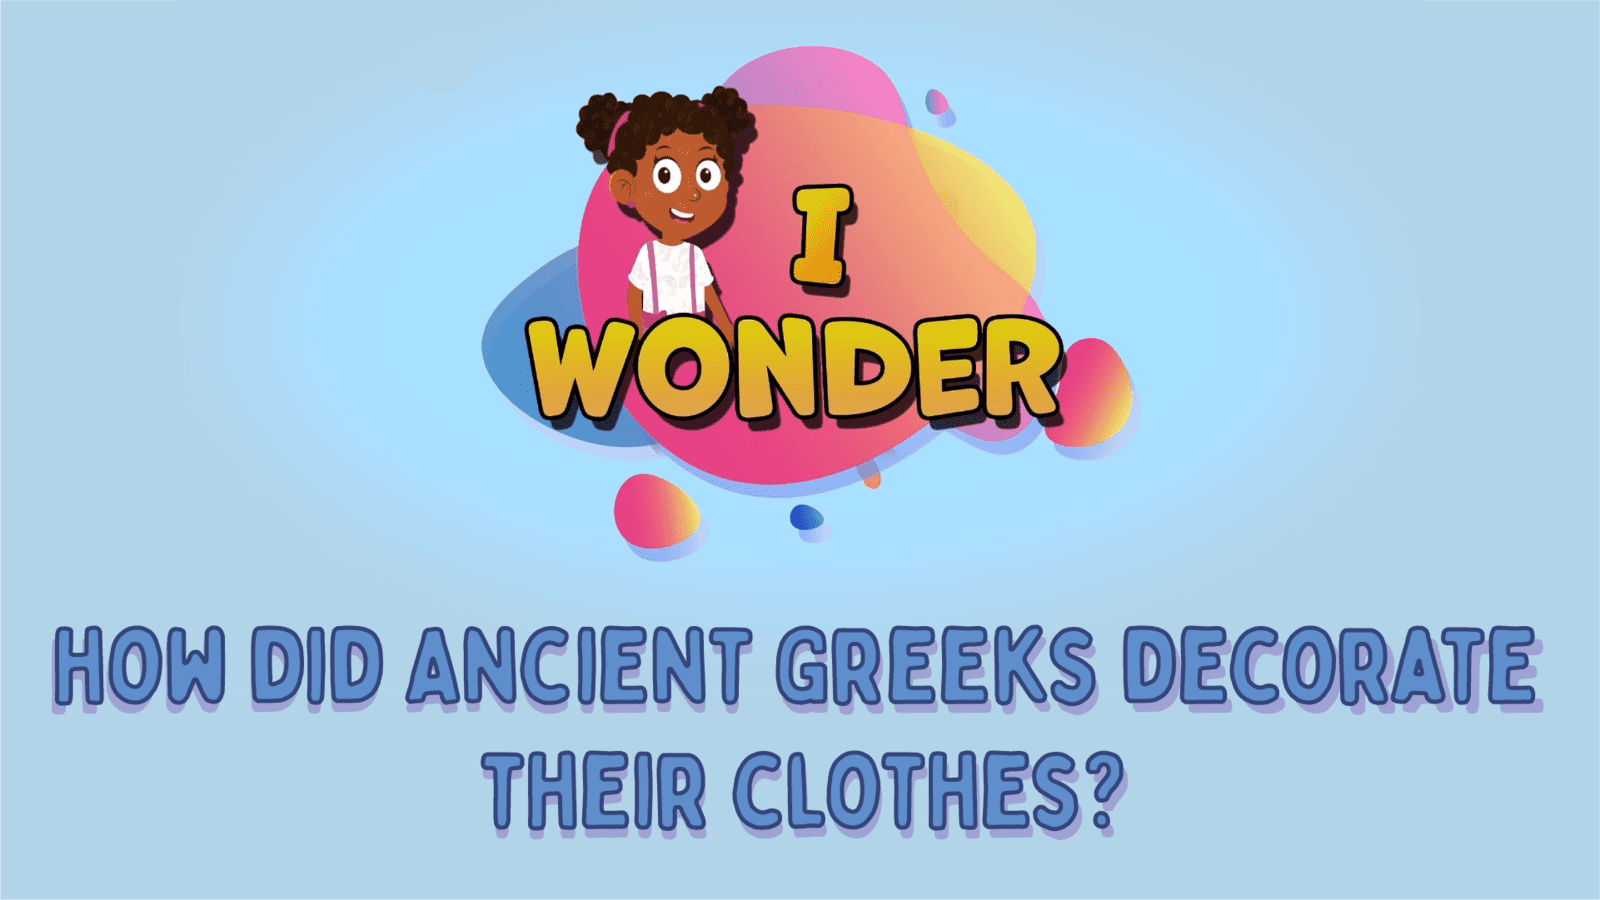 How Did Ancient Greeks Decorate Their Clothes?